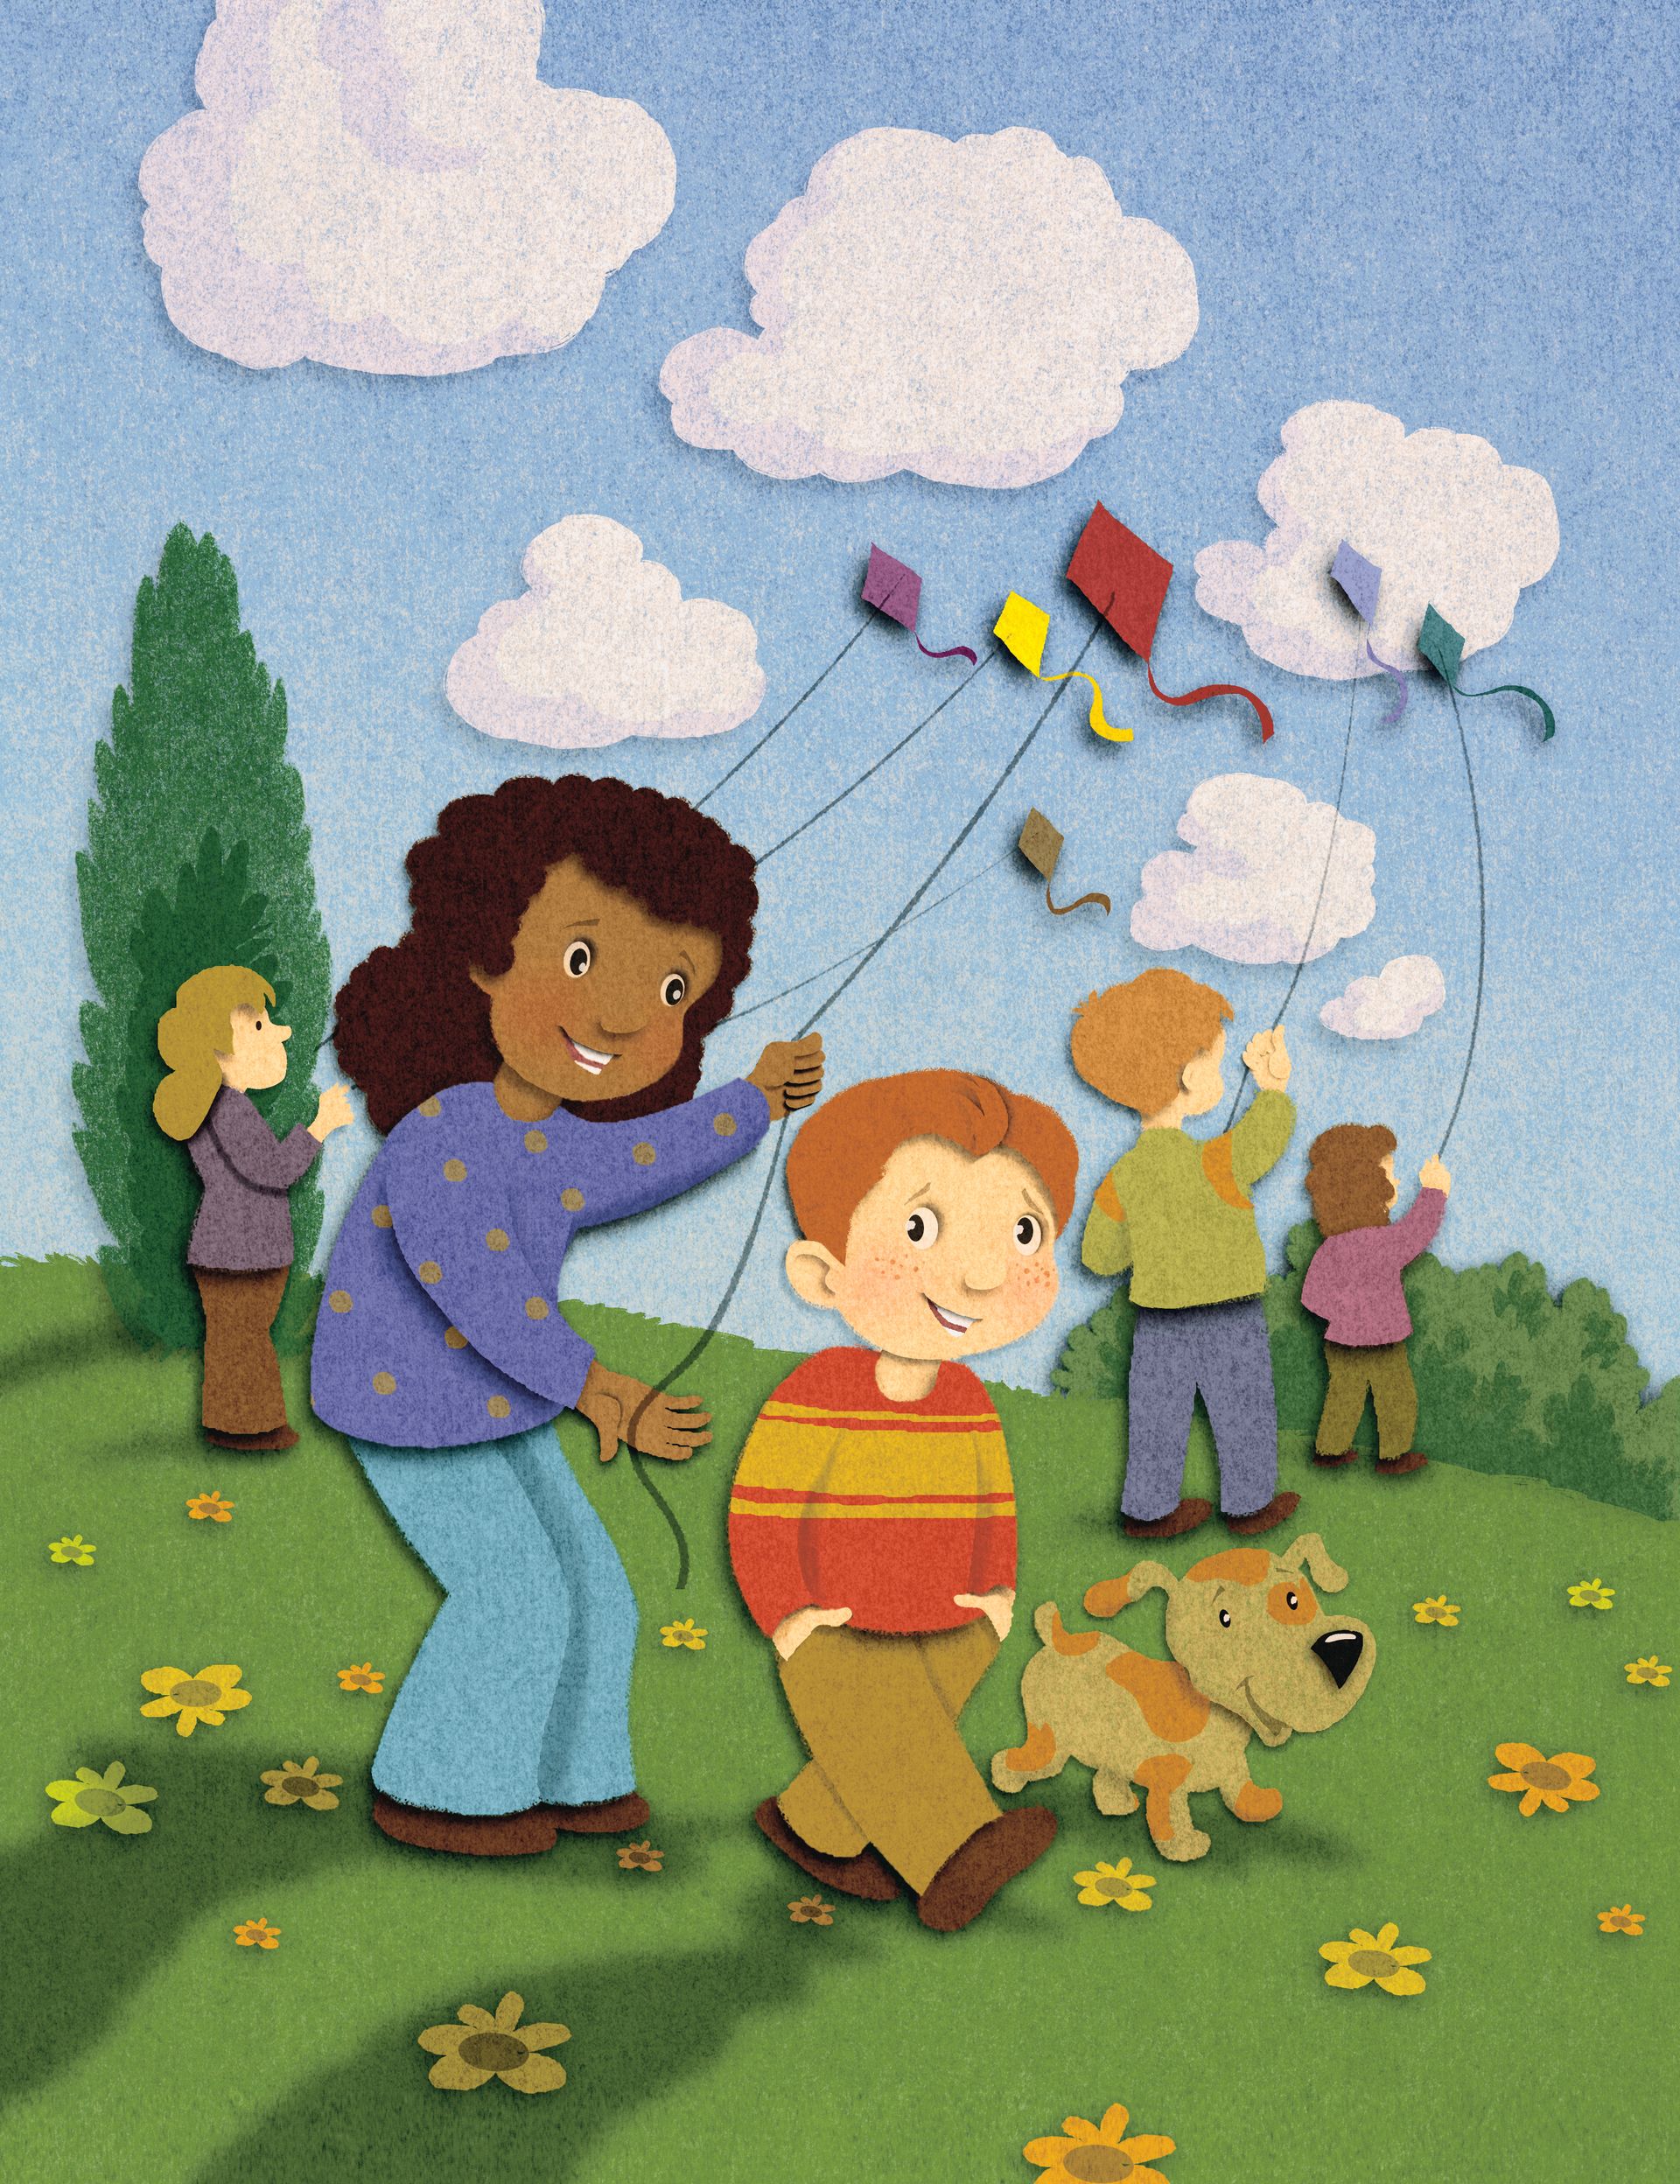 A boy and a girl fly a kite together outside in a park.